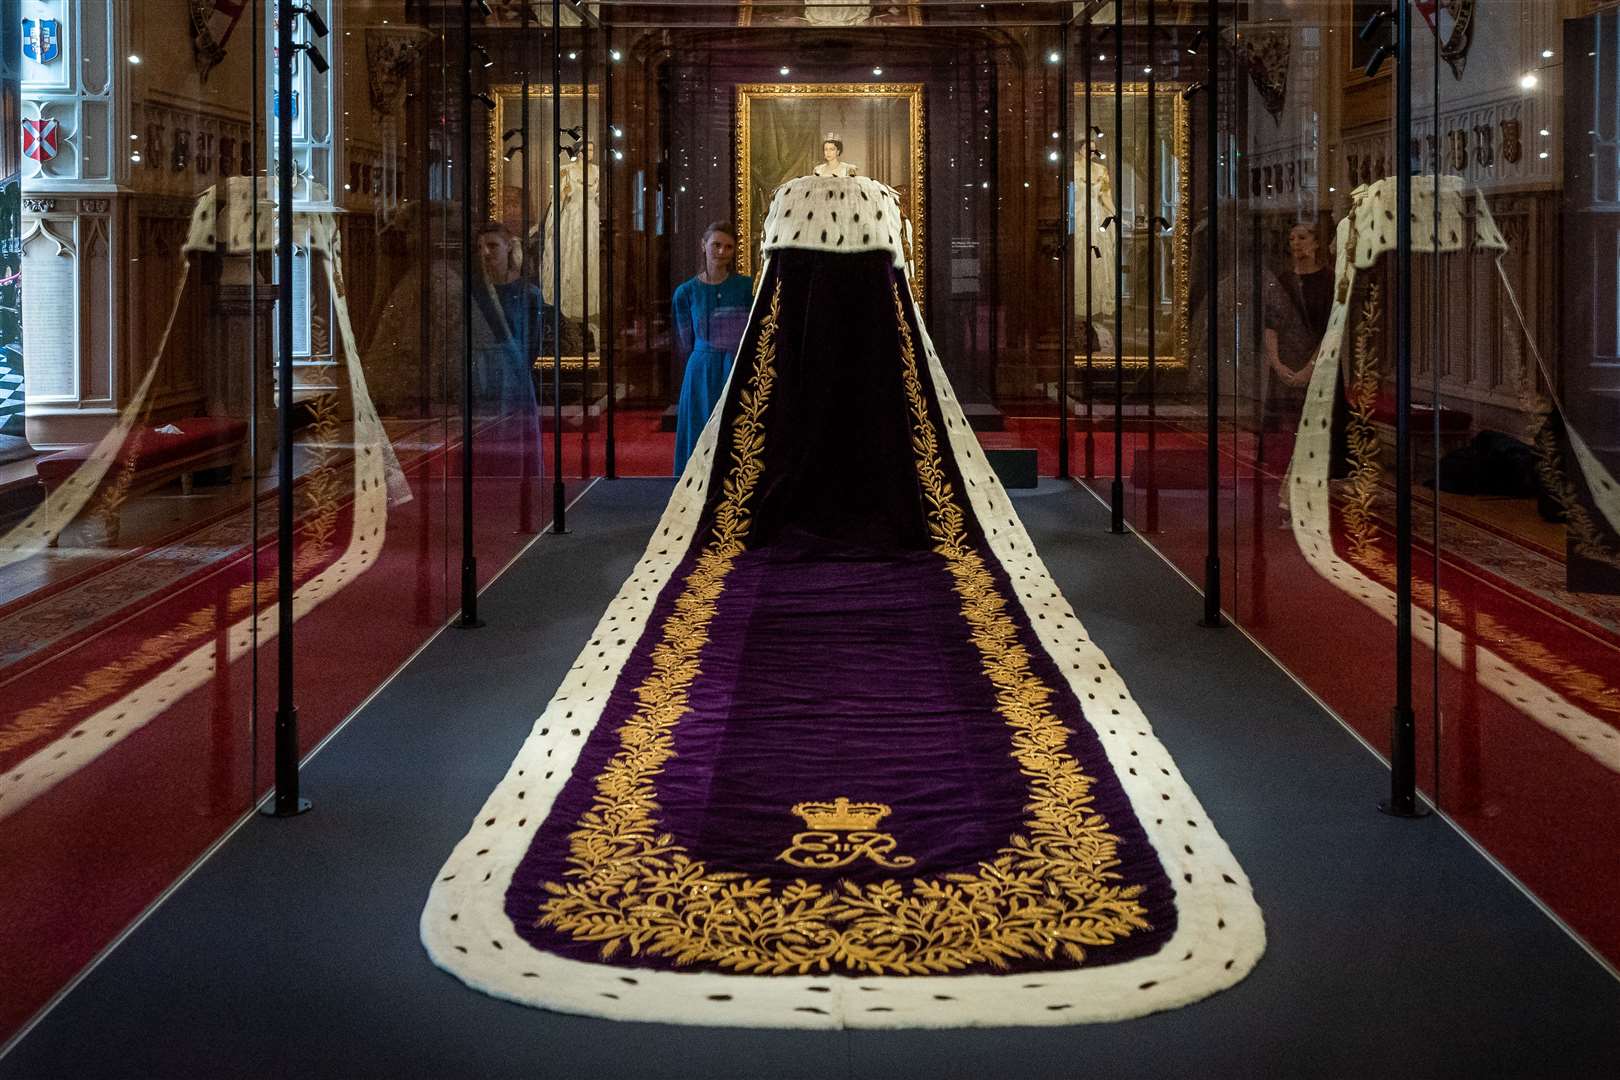 The Coronation Robe of Estate (Aaron Chown/PA)